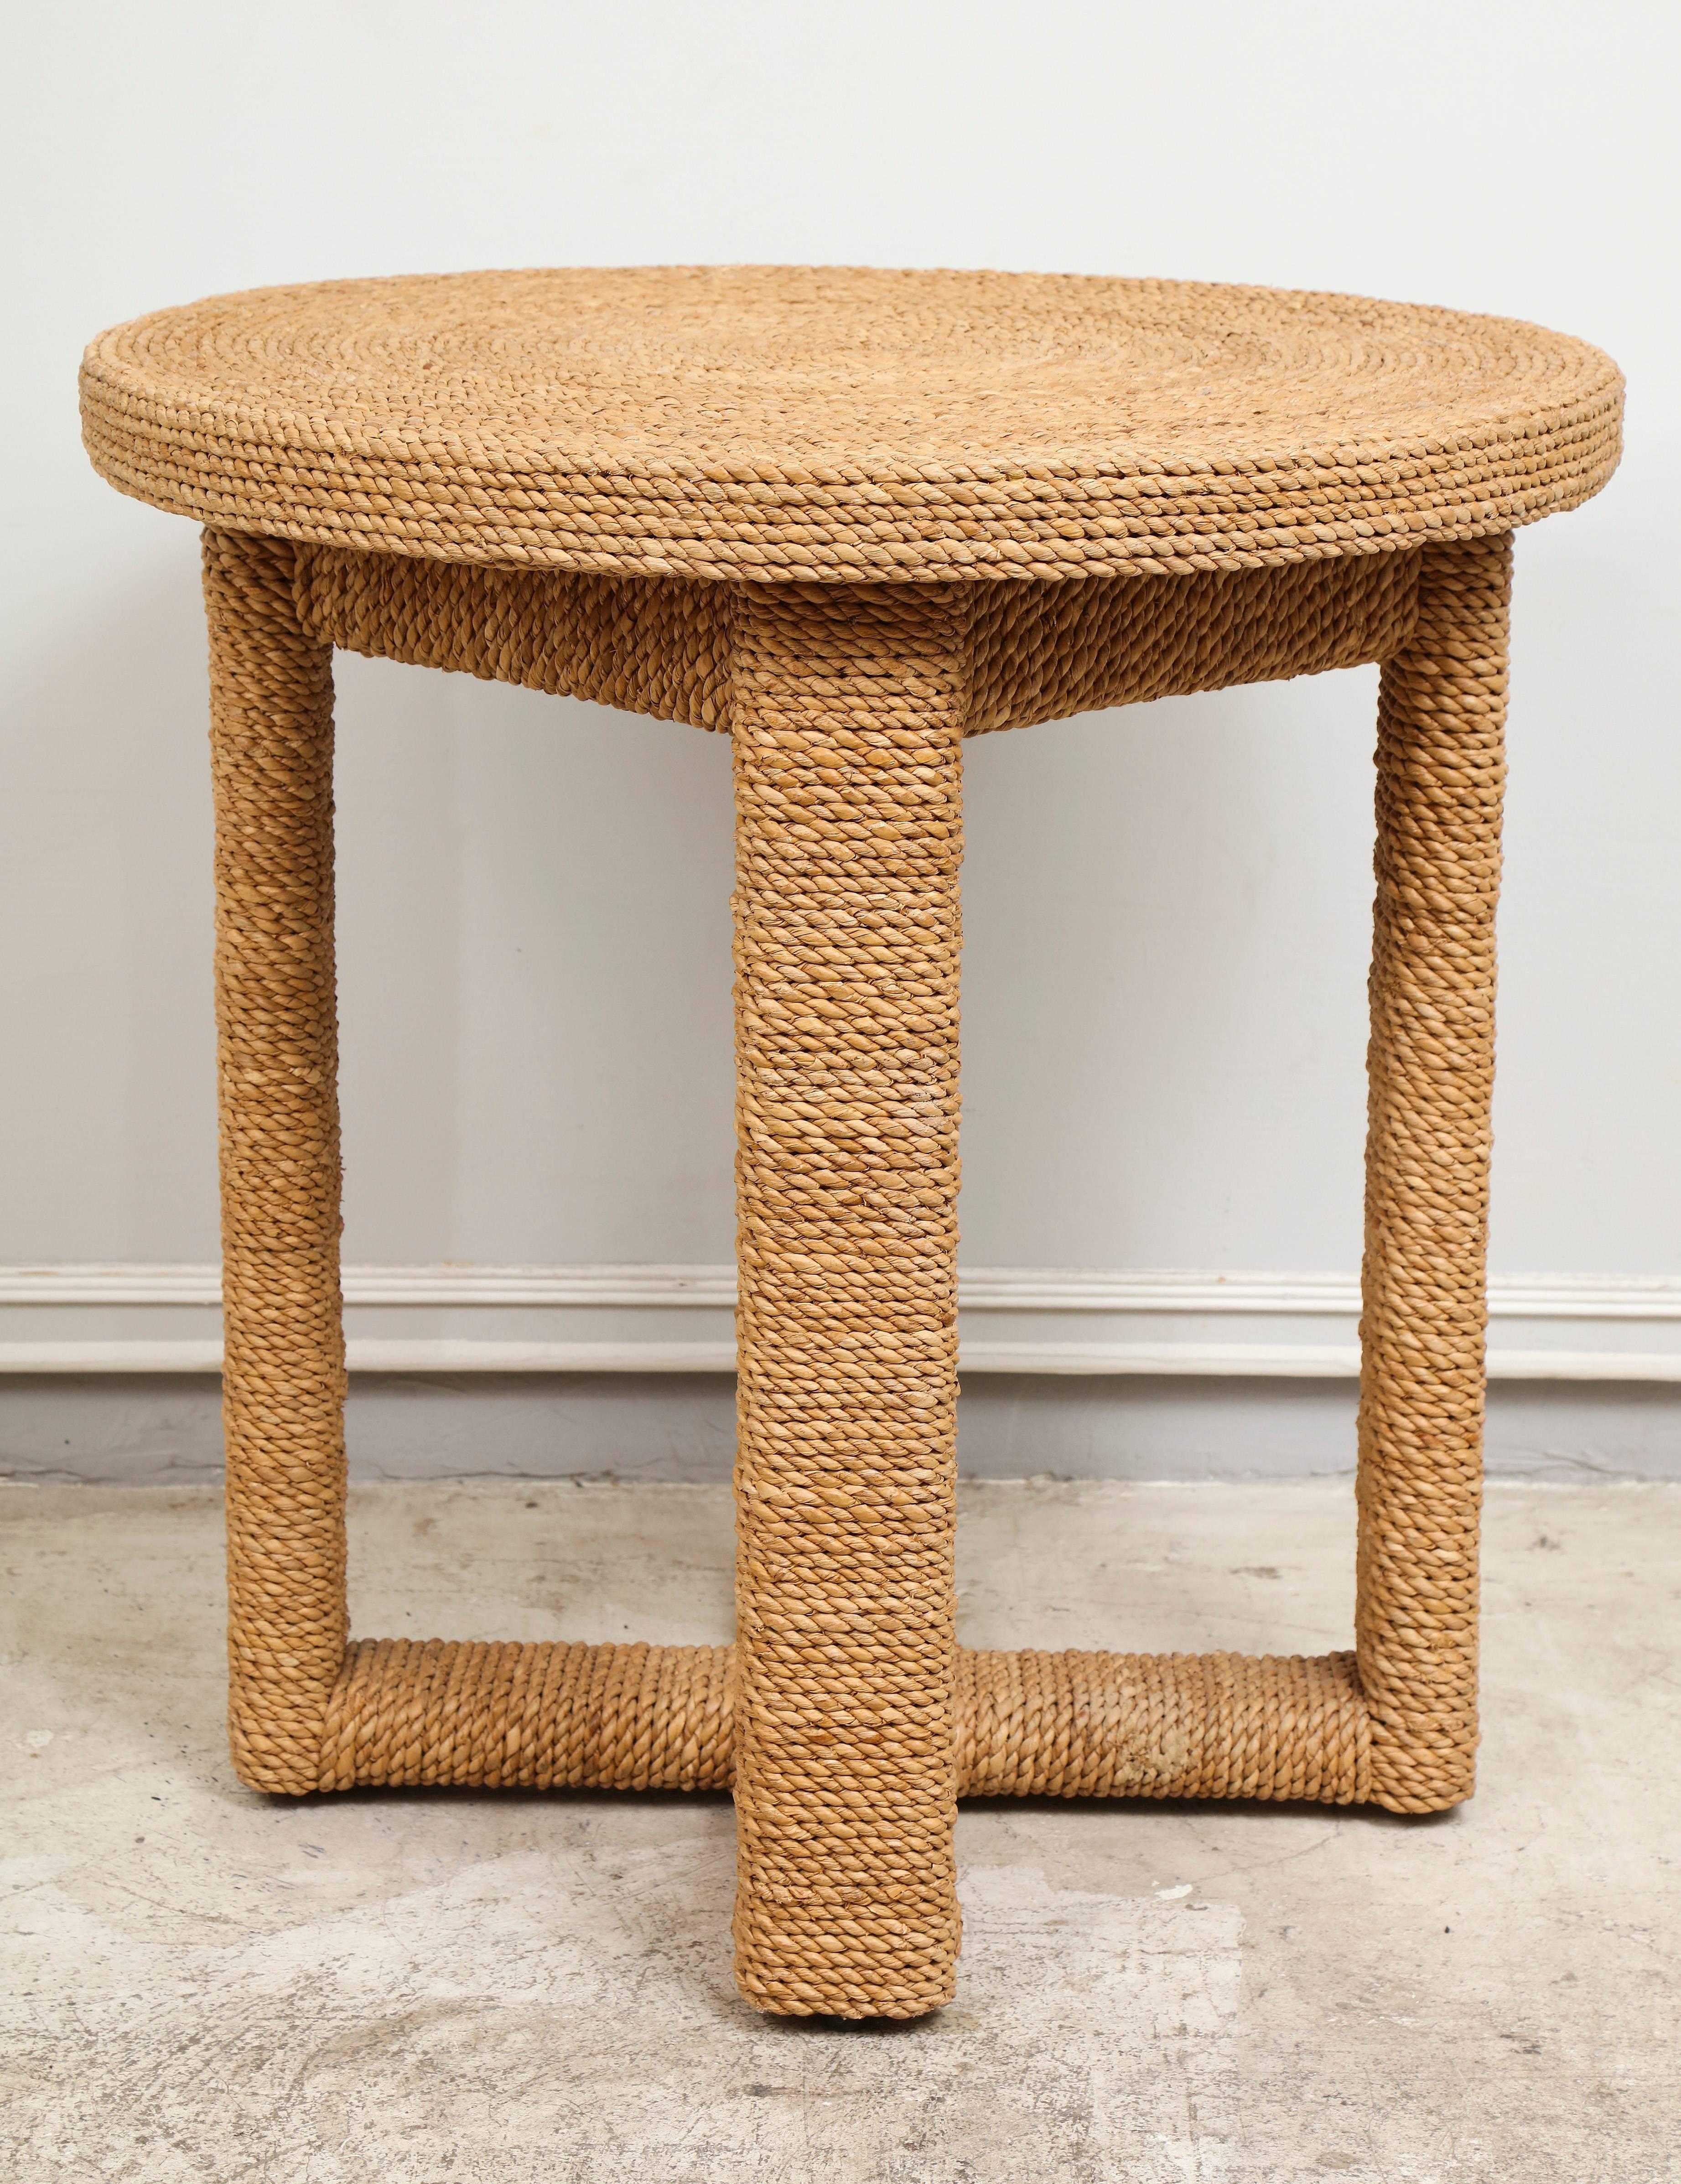 French Jute Table in Audoux Minet Manner